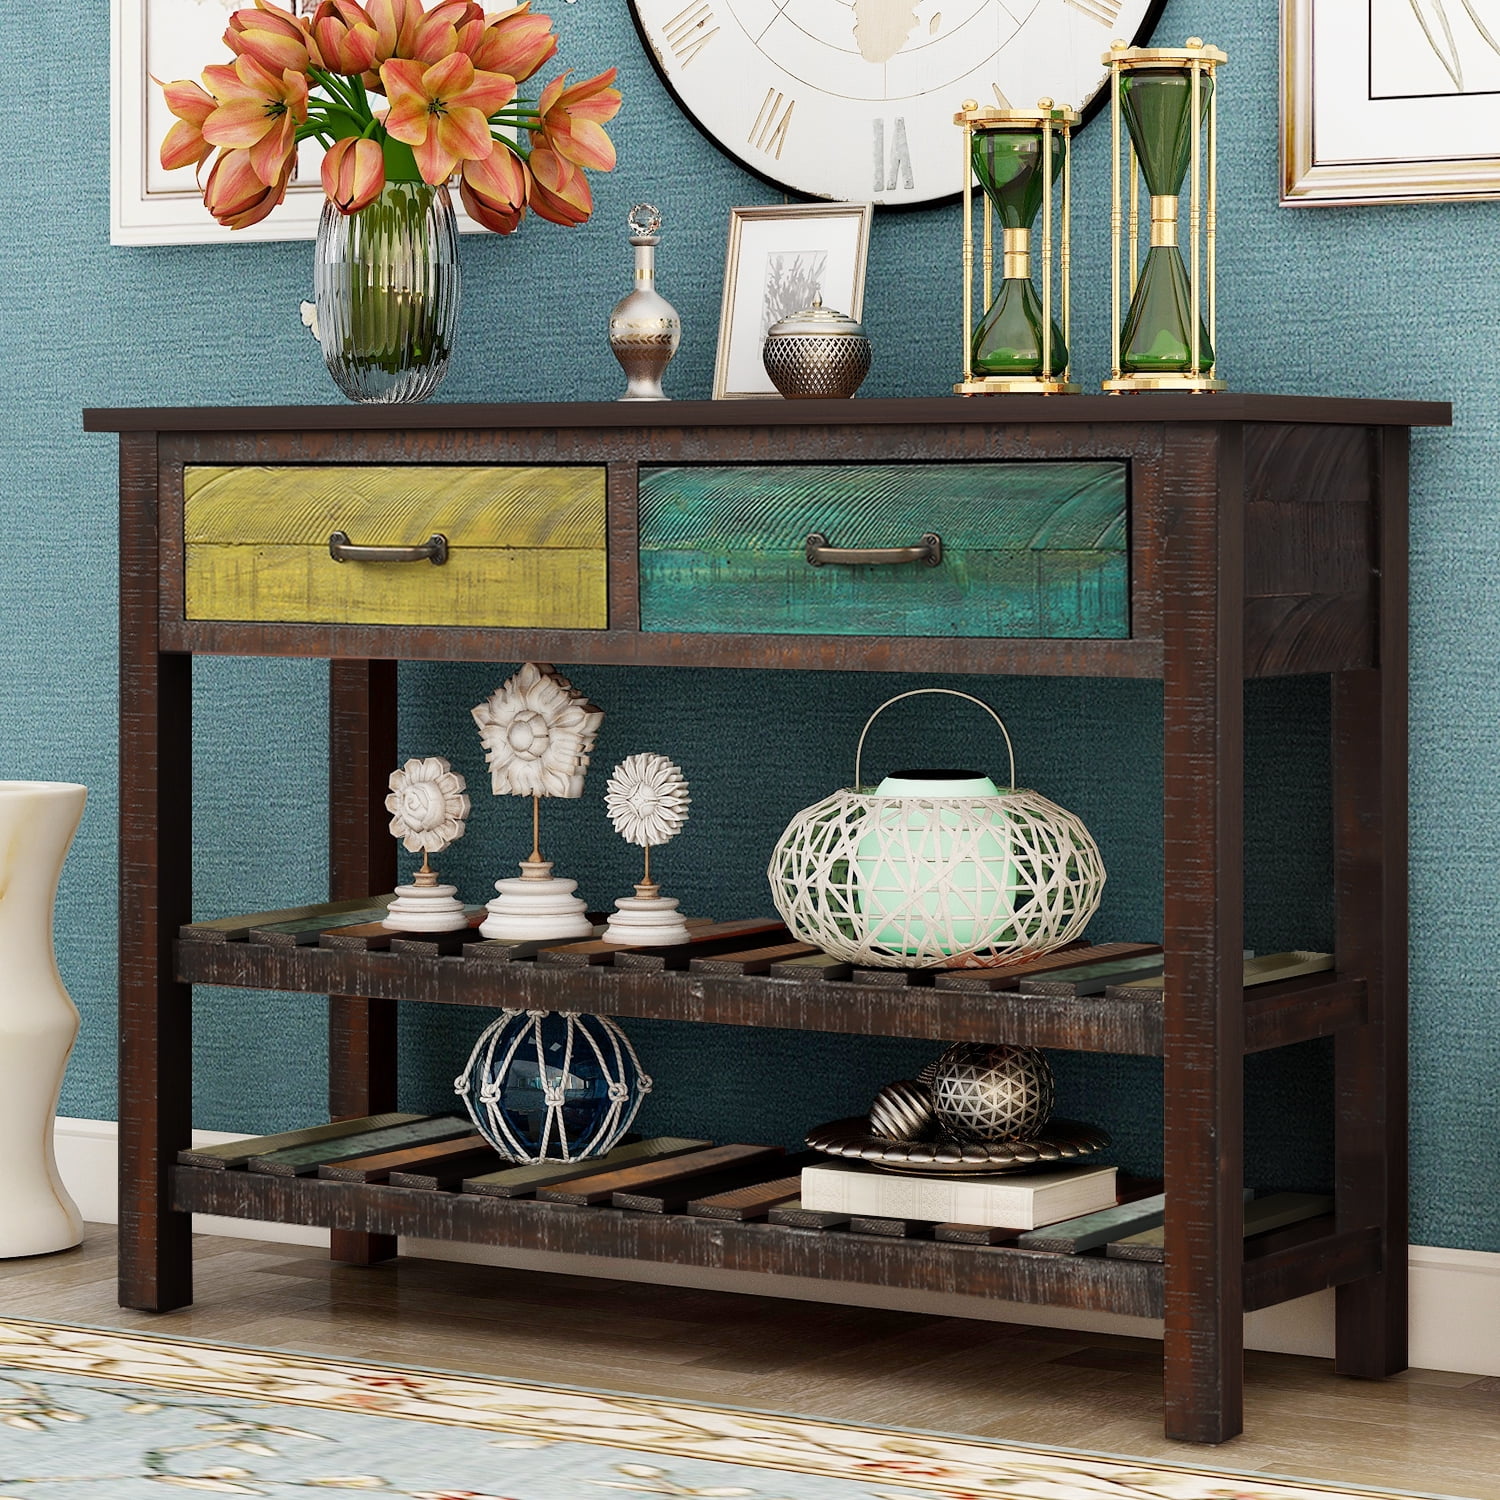 Details about   Living Room Wood Coffee Table Sofa Console Table W/ Open Storage Easy Assembly 